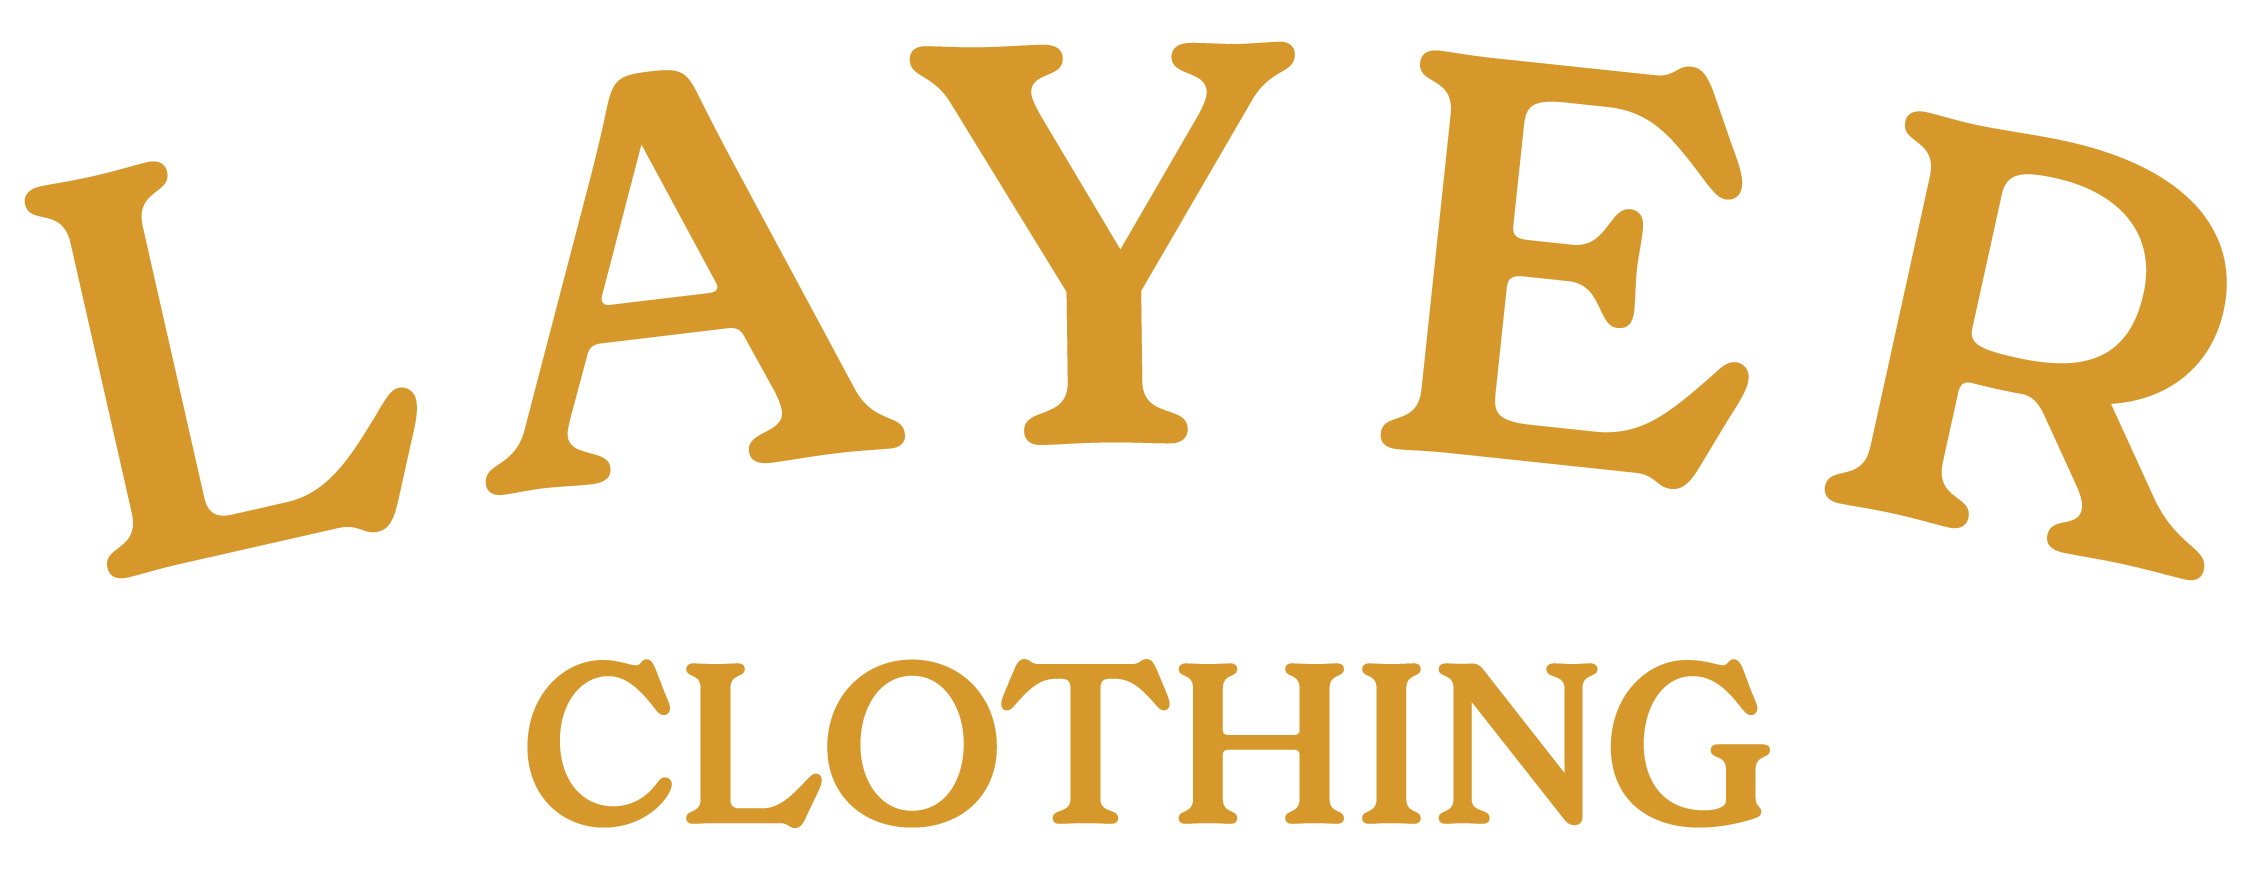 Layer Clothing